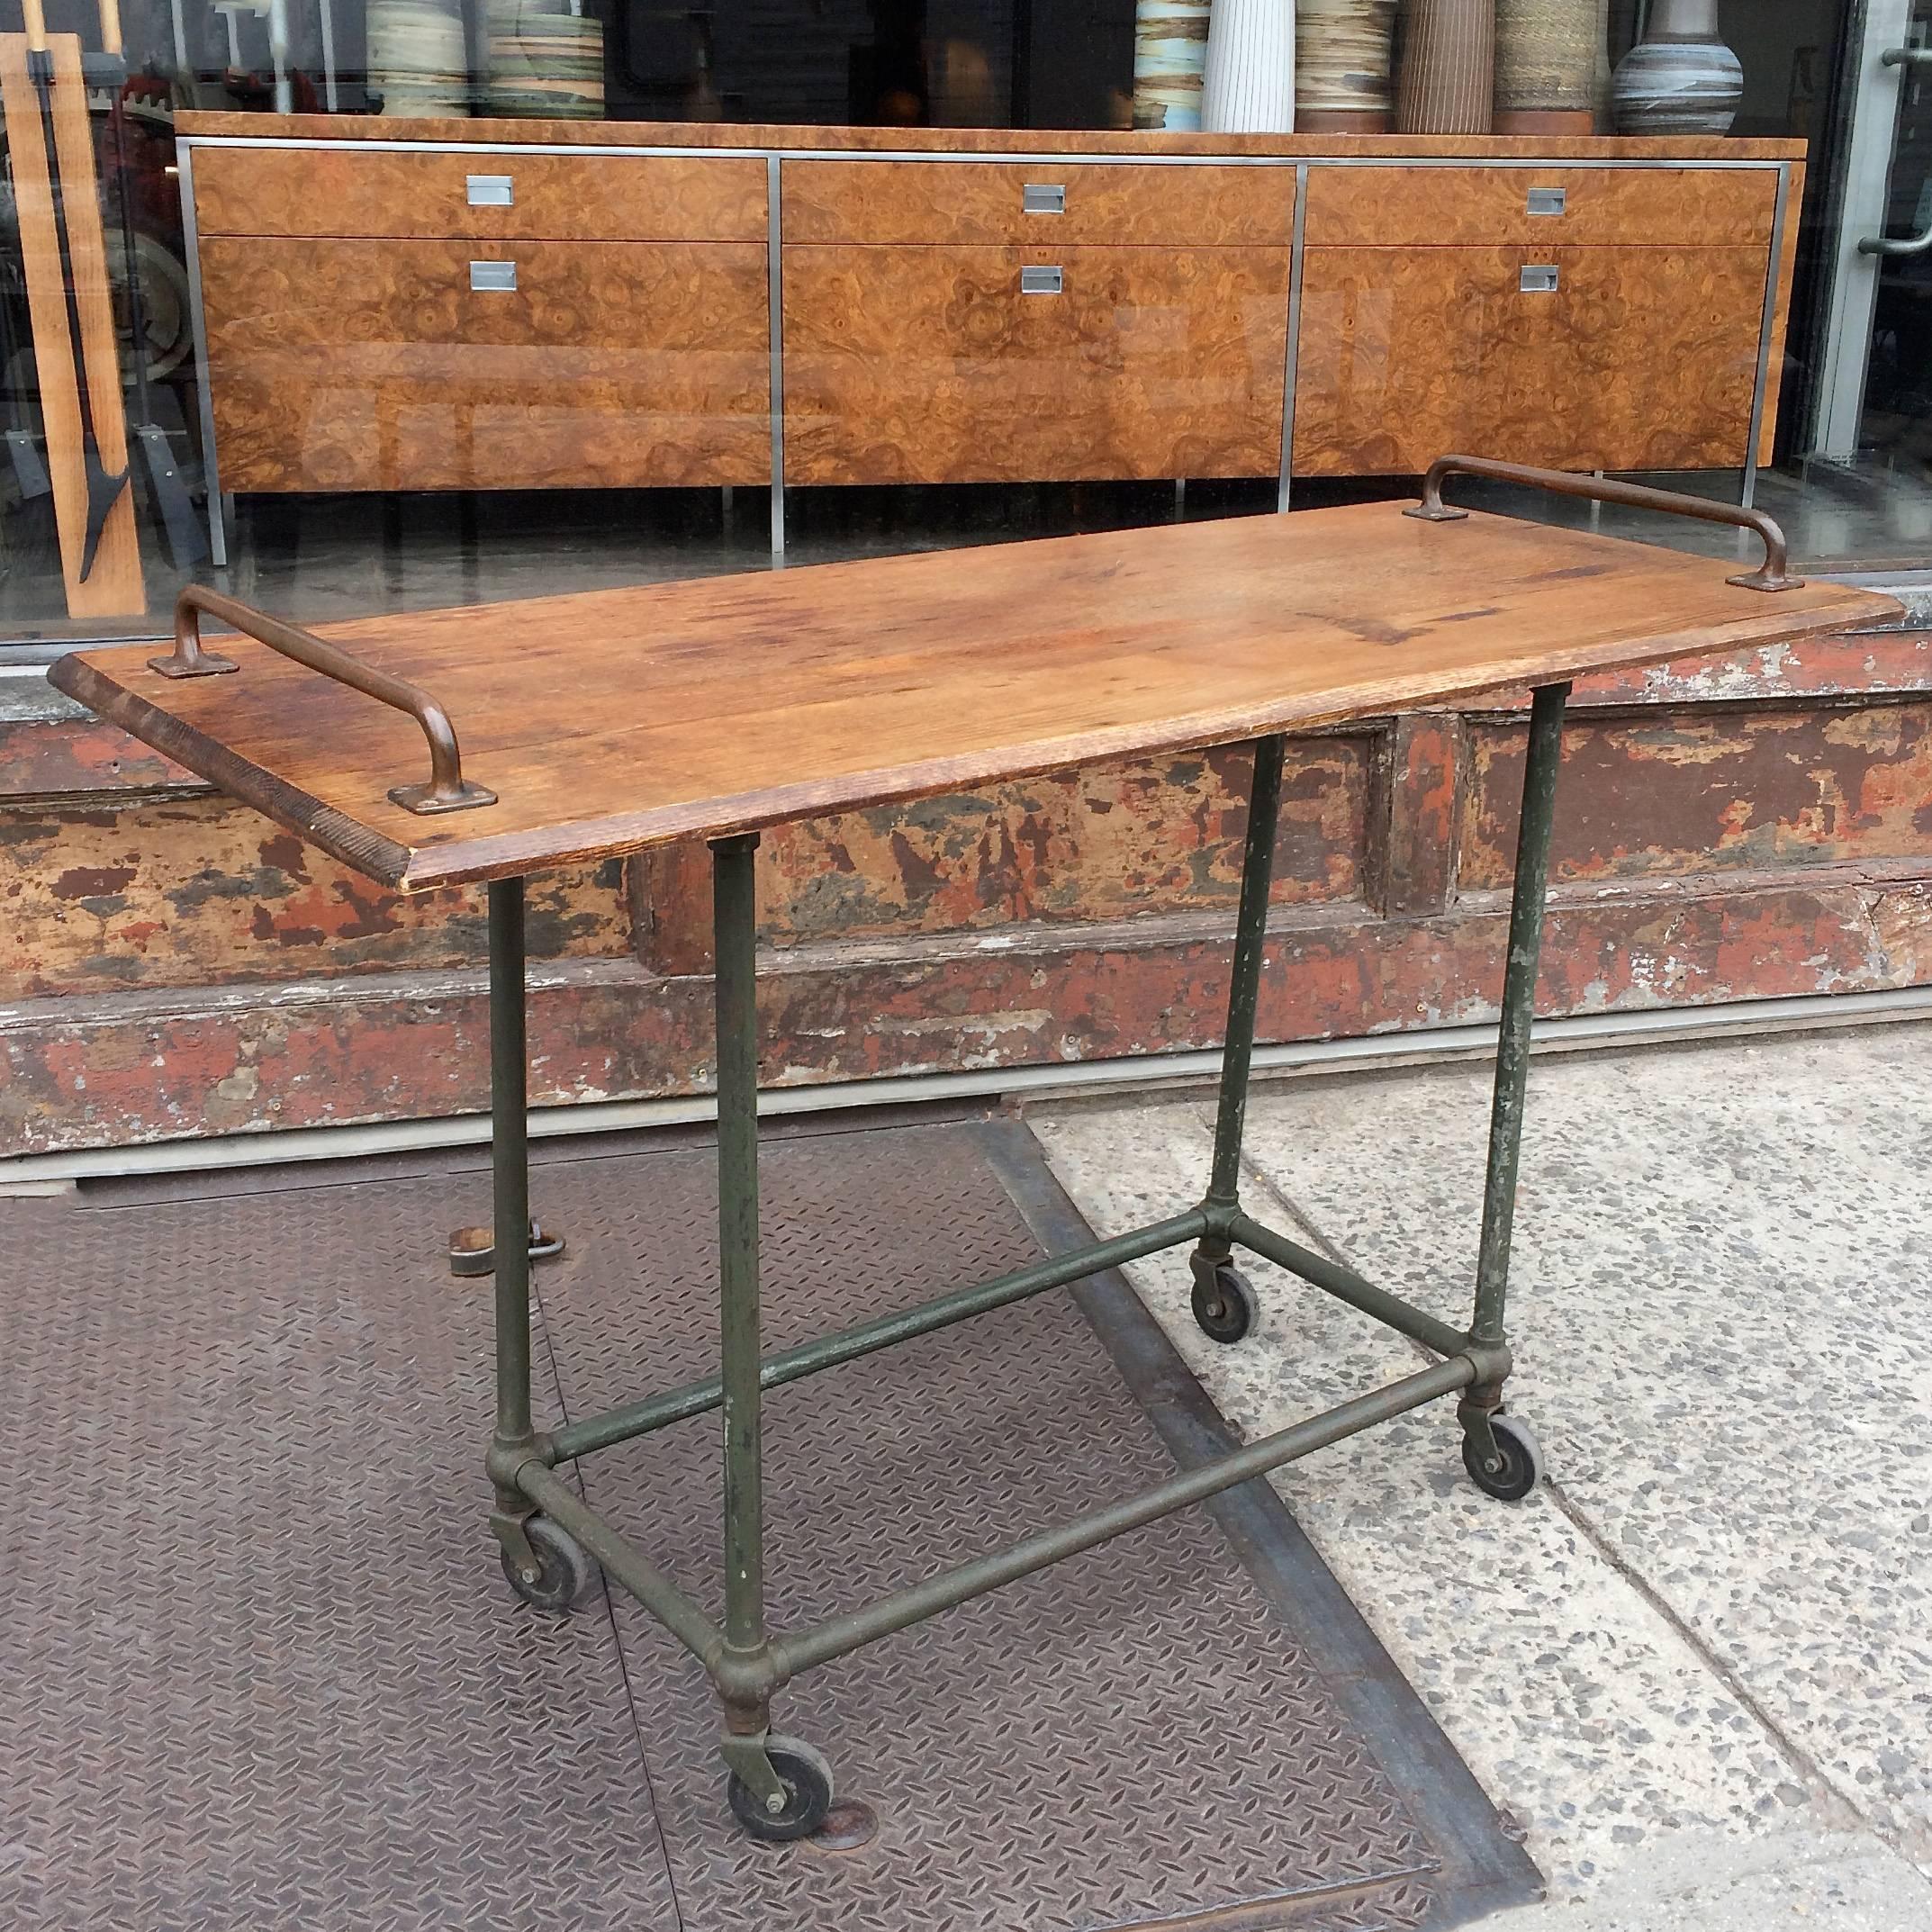 Custom, Industrial, console table features a reclaimed oak top with beveled edge, brass handle accents and a painted steel, rolling base. The table works well as a tall dining table or kitchen island as well as a work table or console. The angle